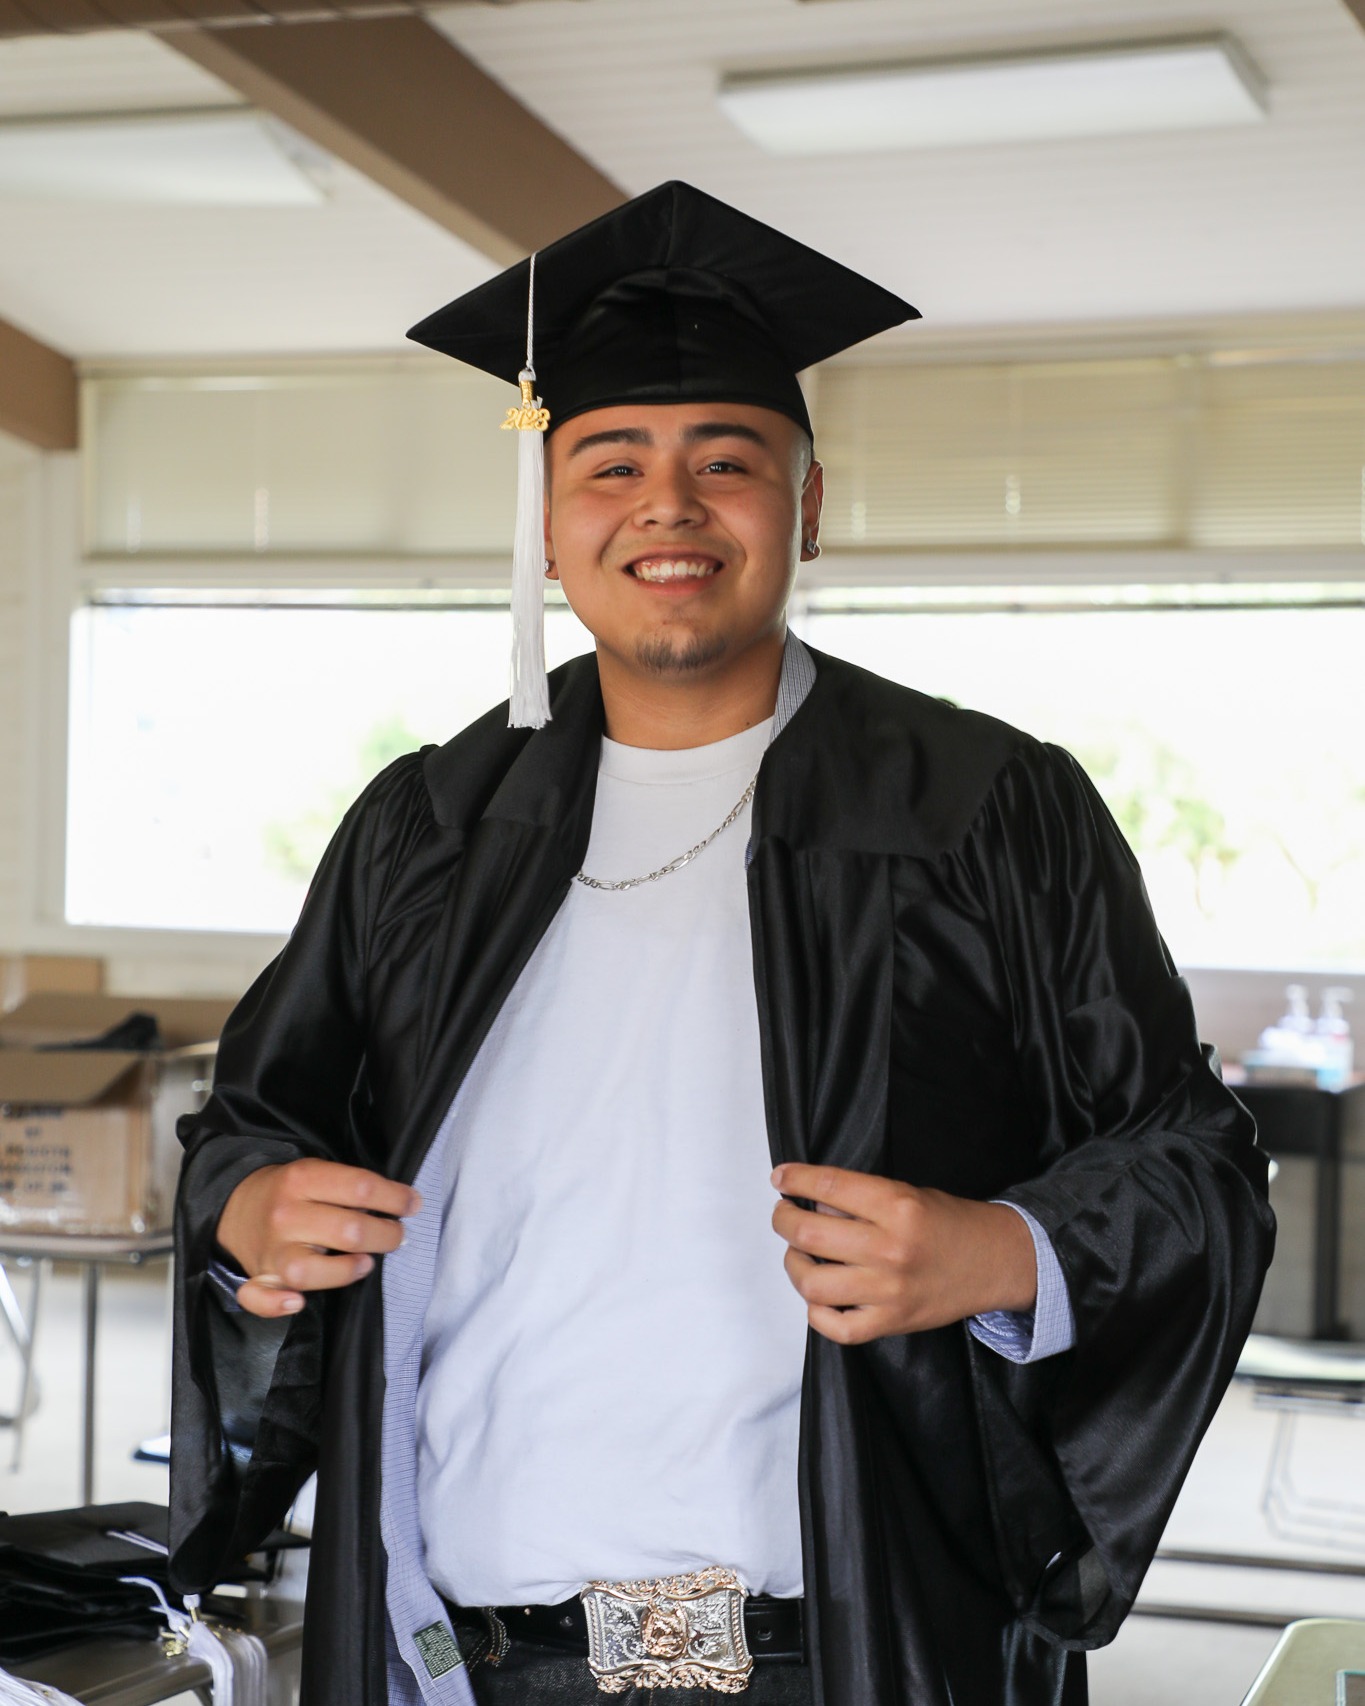 Student wearing graduation gown